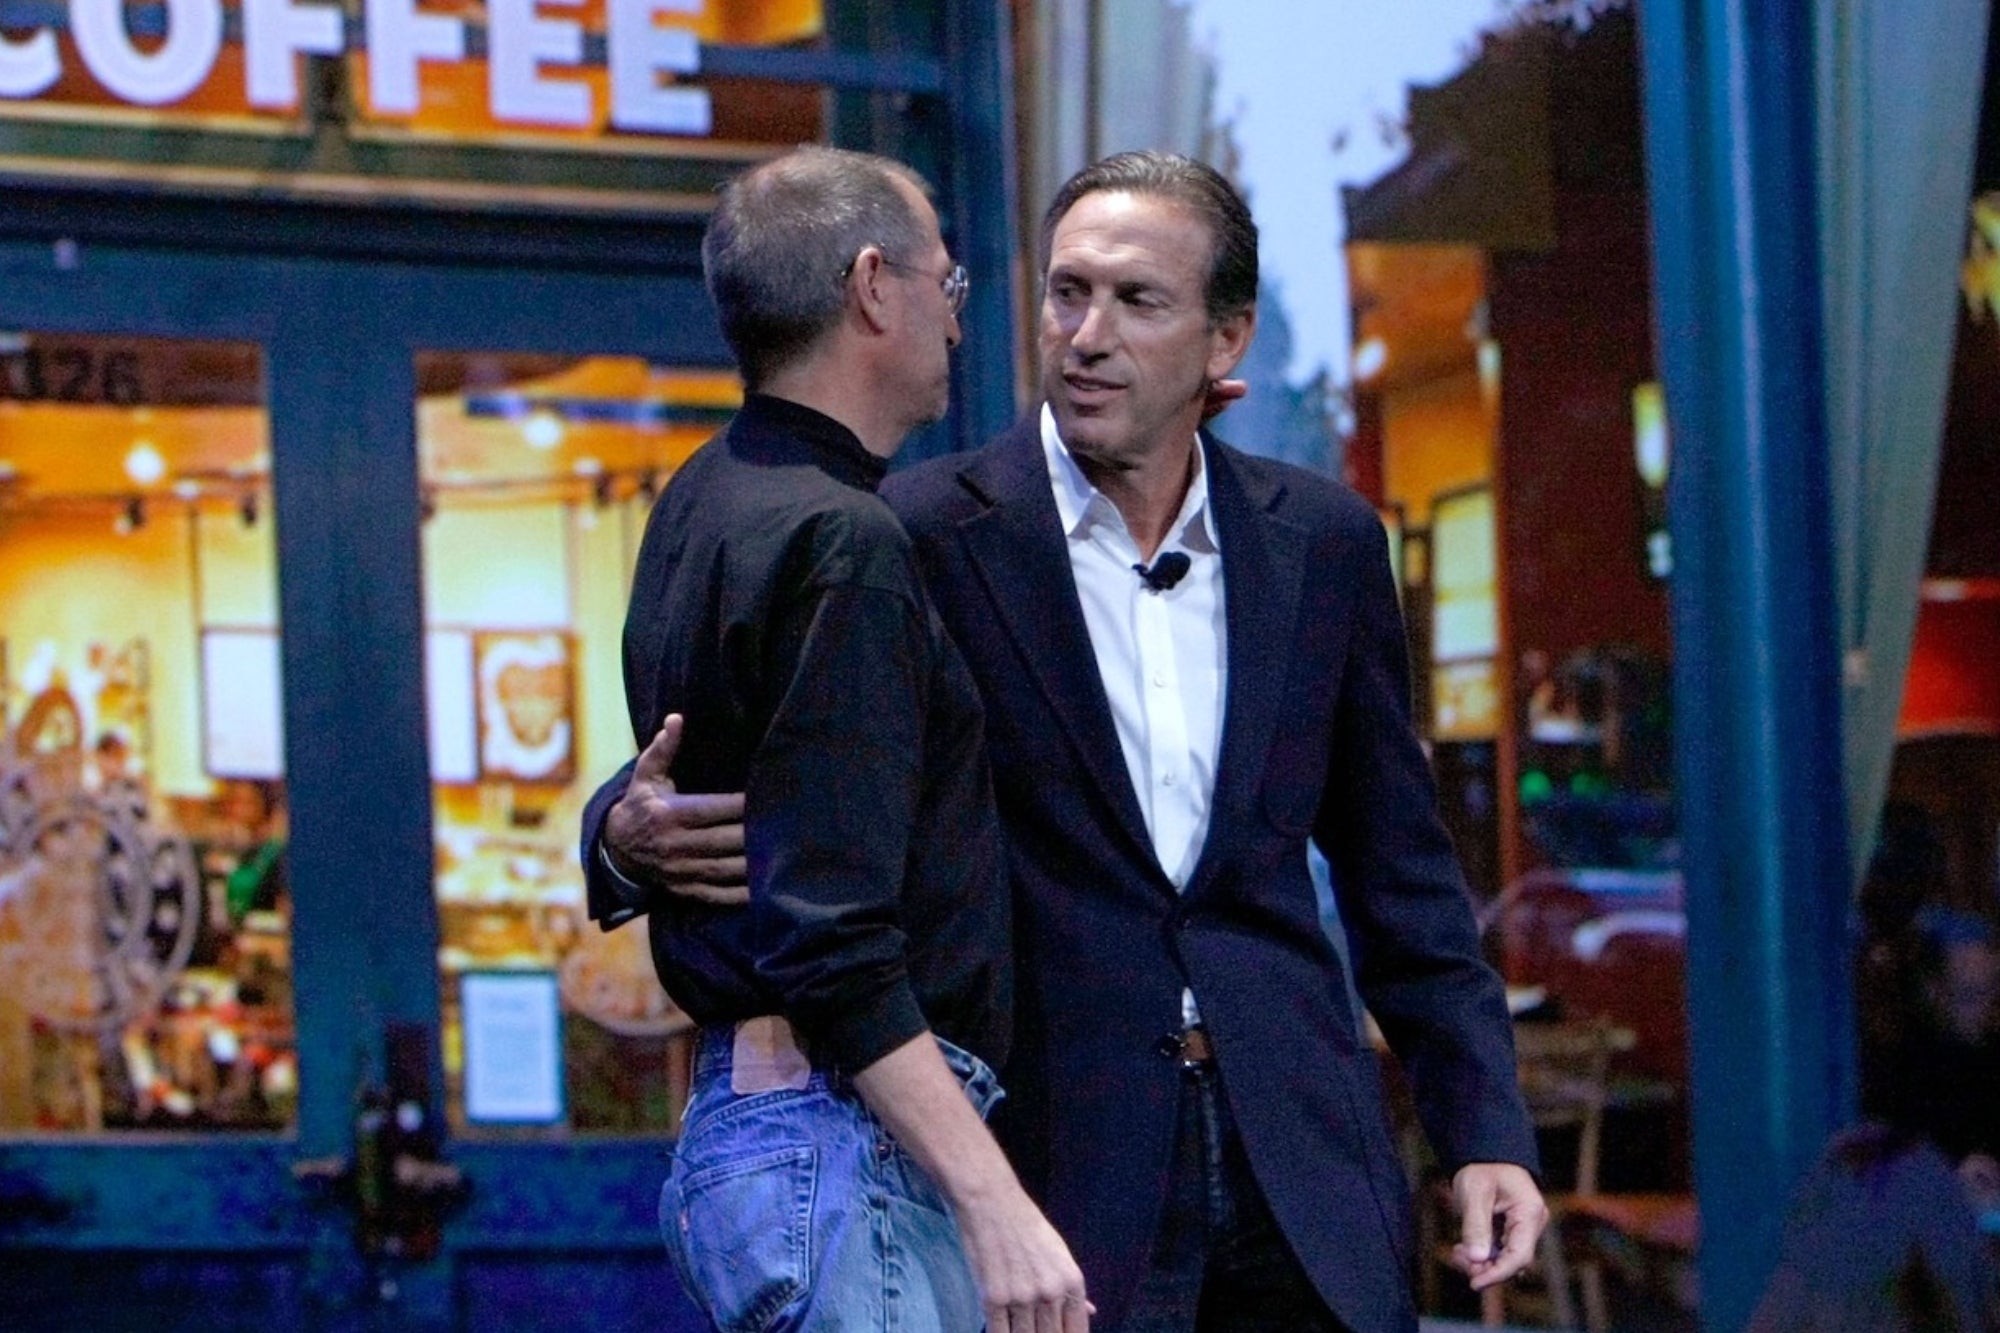 Howard Schultz: Steve Jobs Once Told Me to ‘Fire Everyone’ [Video]